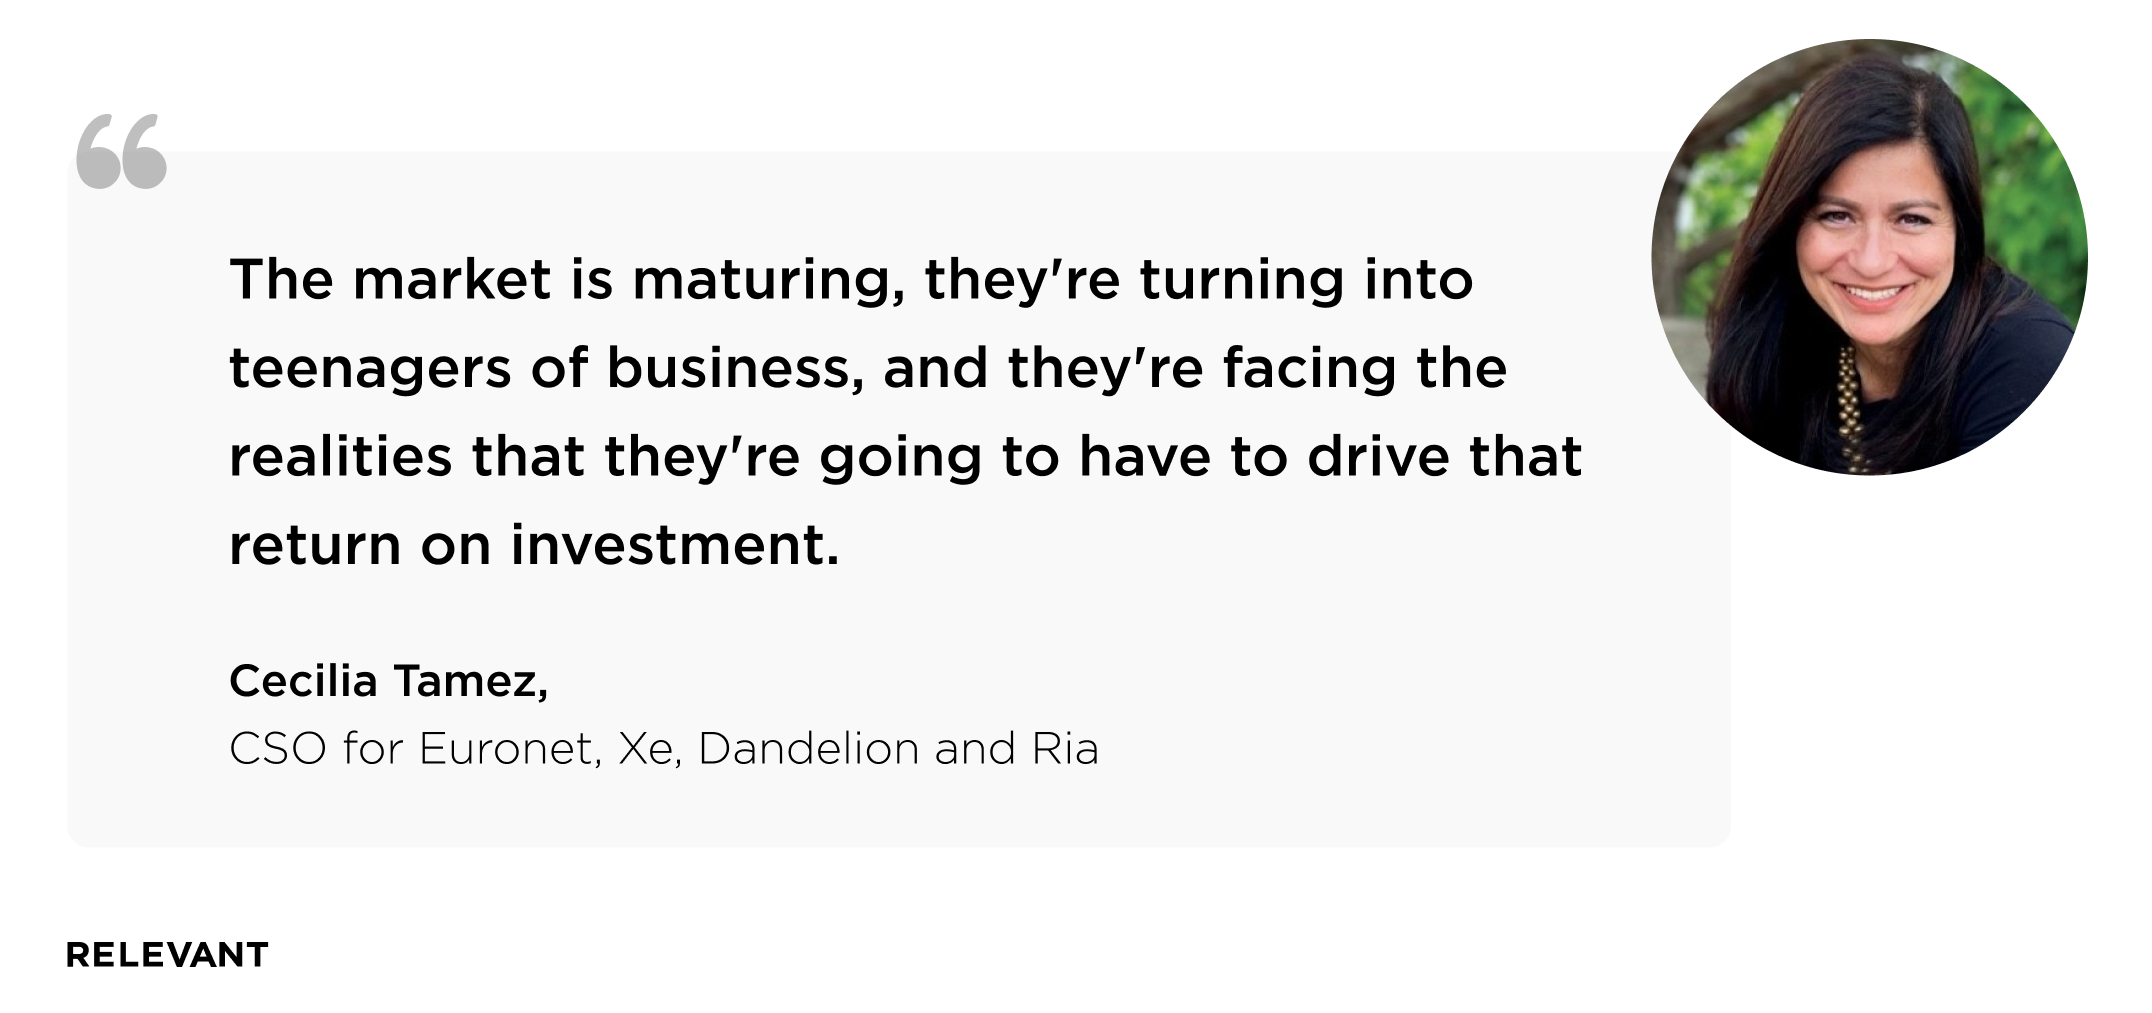 the market is maturing, they're turning into teenagers of business, and they're facing the realities that they're going to have to drive that return on investment